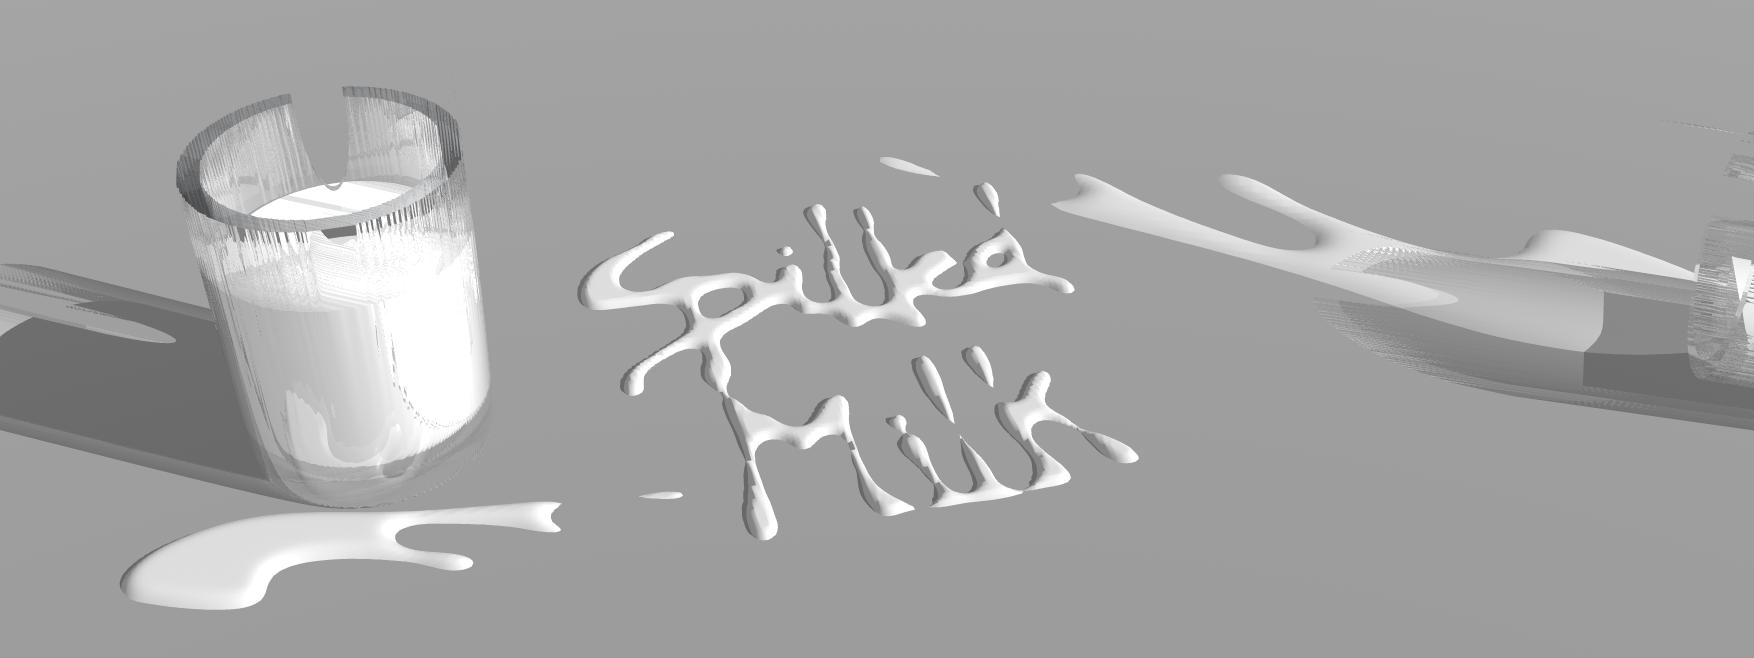 Spilled Milk logo spelled out with a glass of spilled milk